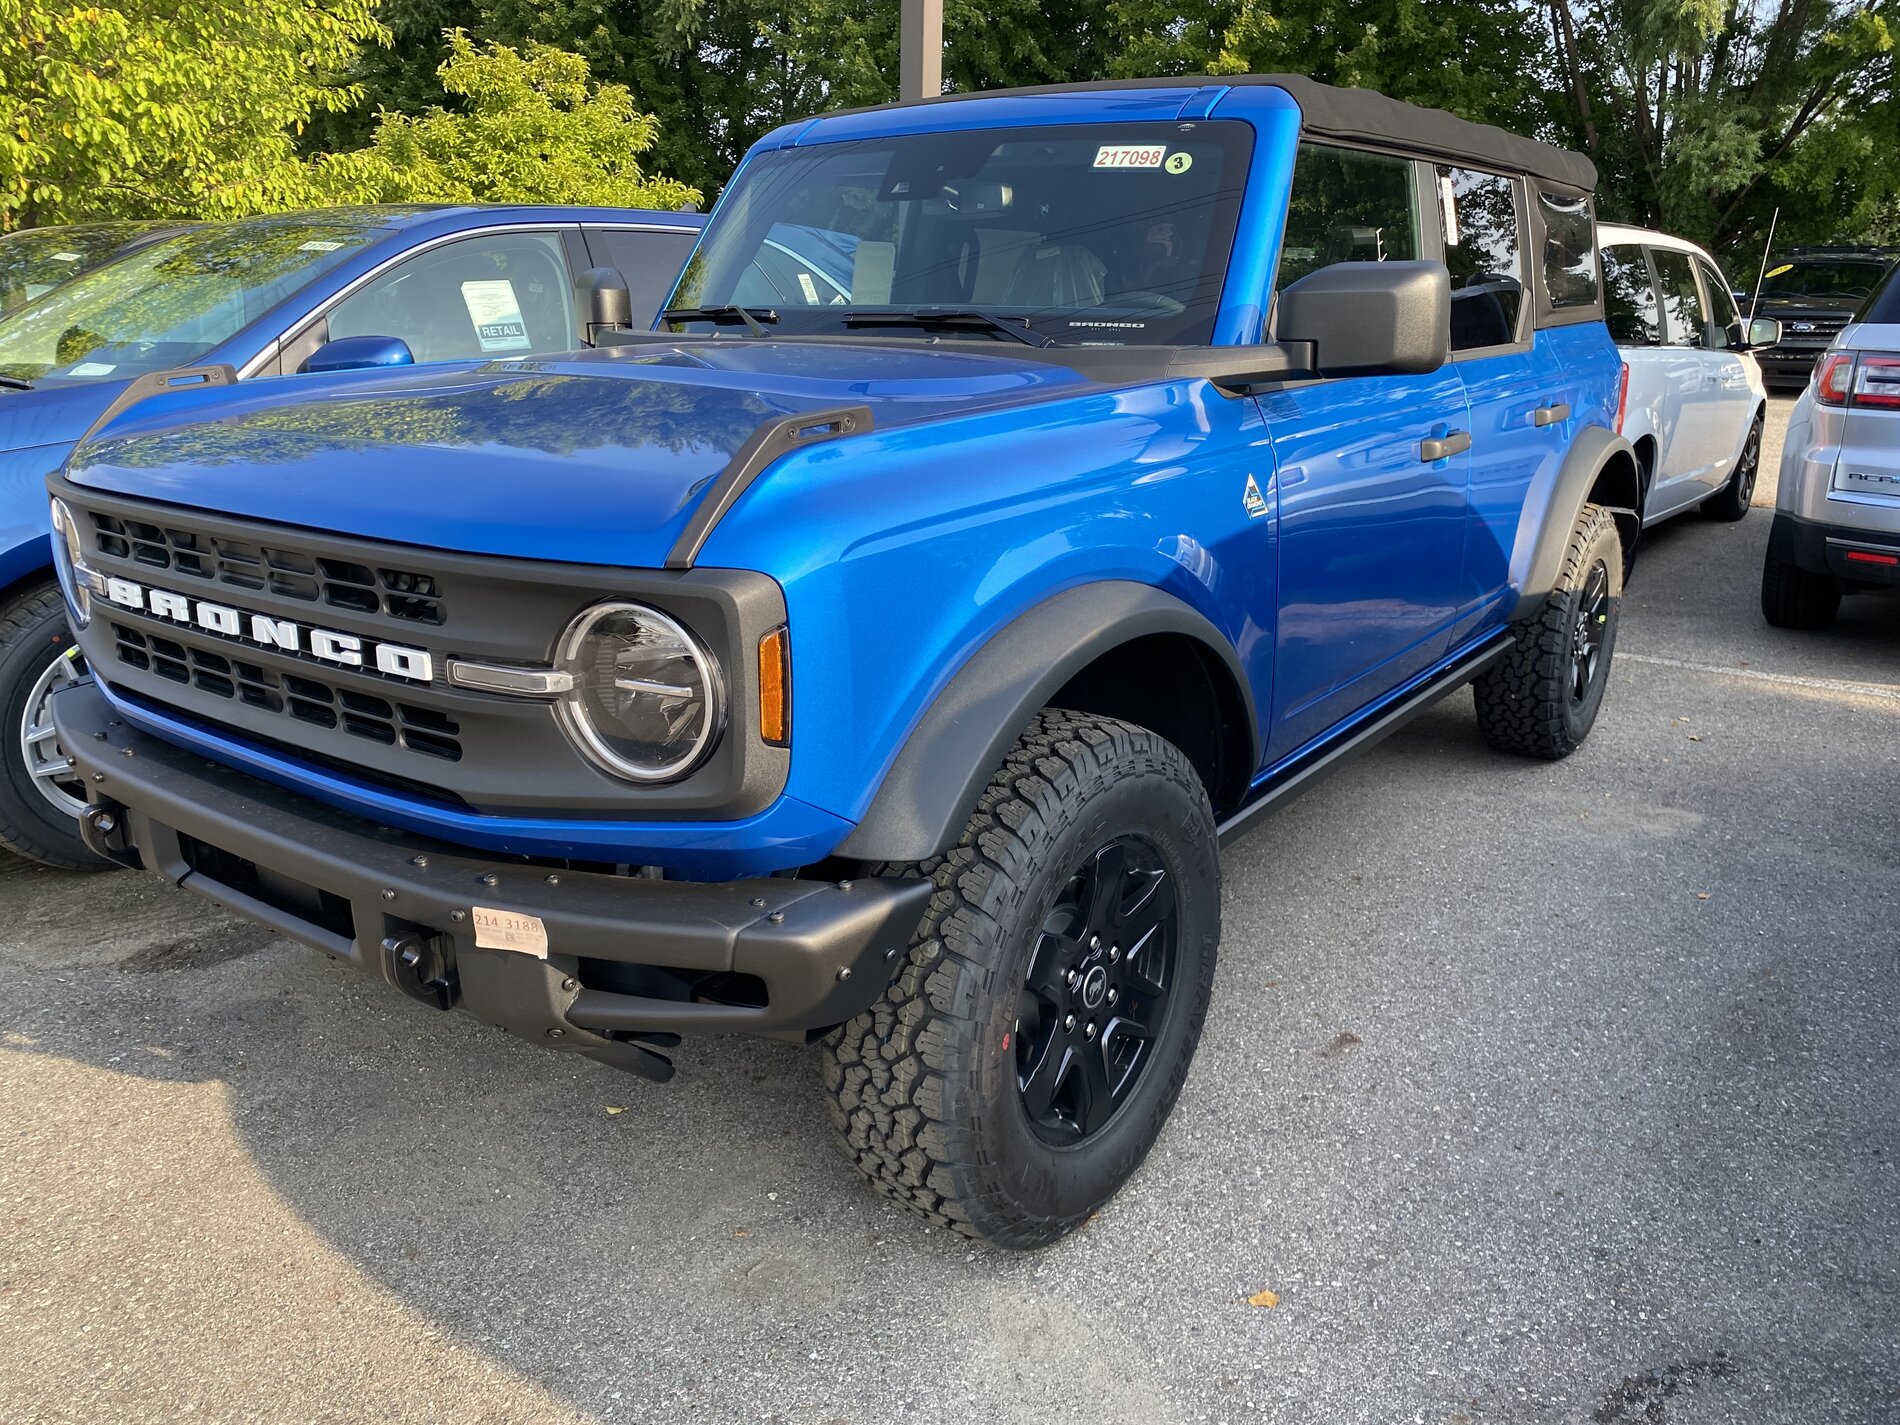 Ford Bronco Mike Levine's non-answer... or is it? B8220BE9-3D0B-434C-93AE-2907F875BF07